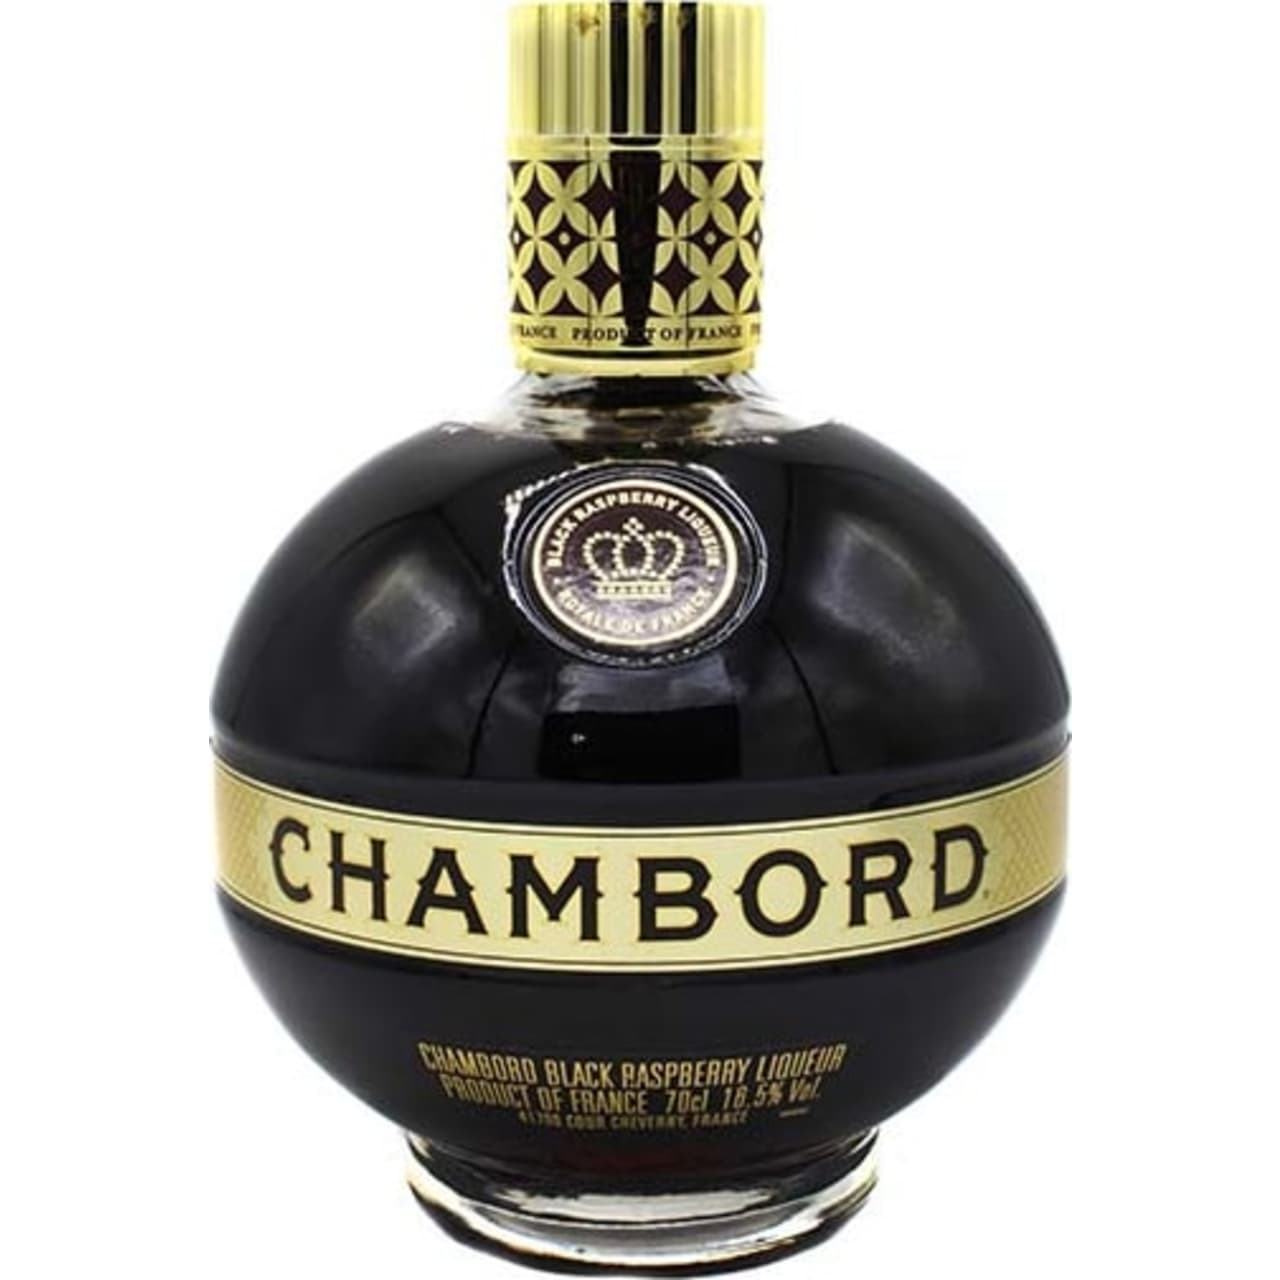 Chambord is a rich framboise-style liqueur based on neutral spirit with blackberries and raspberries flavoured with herbs and honey.